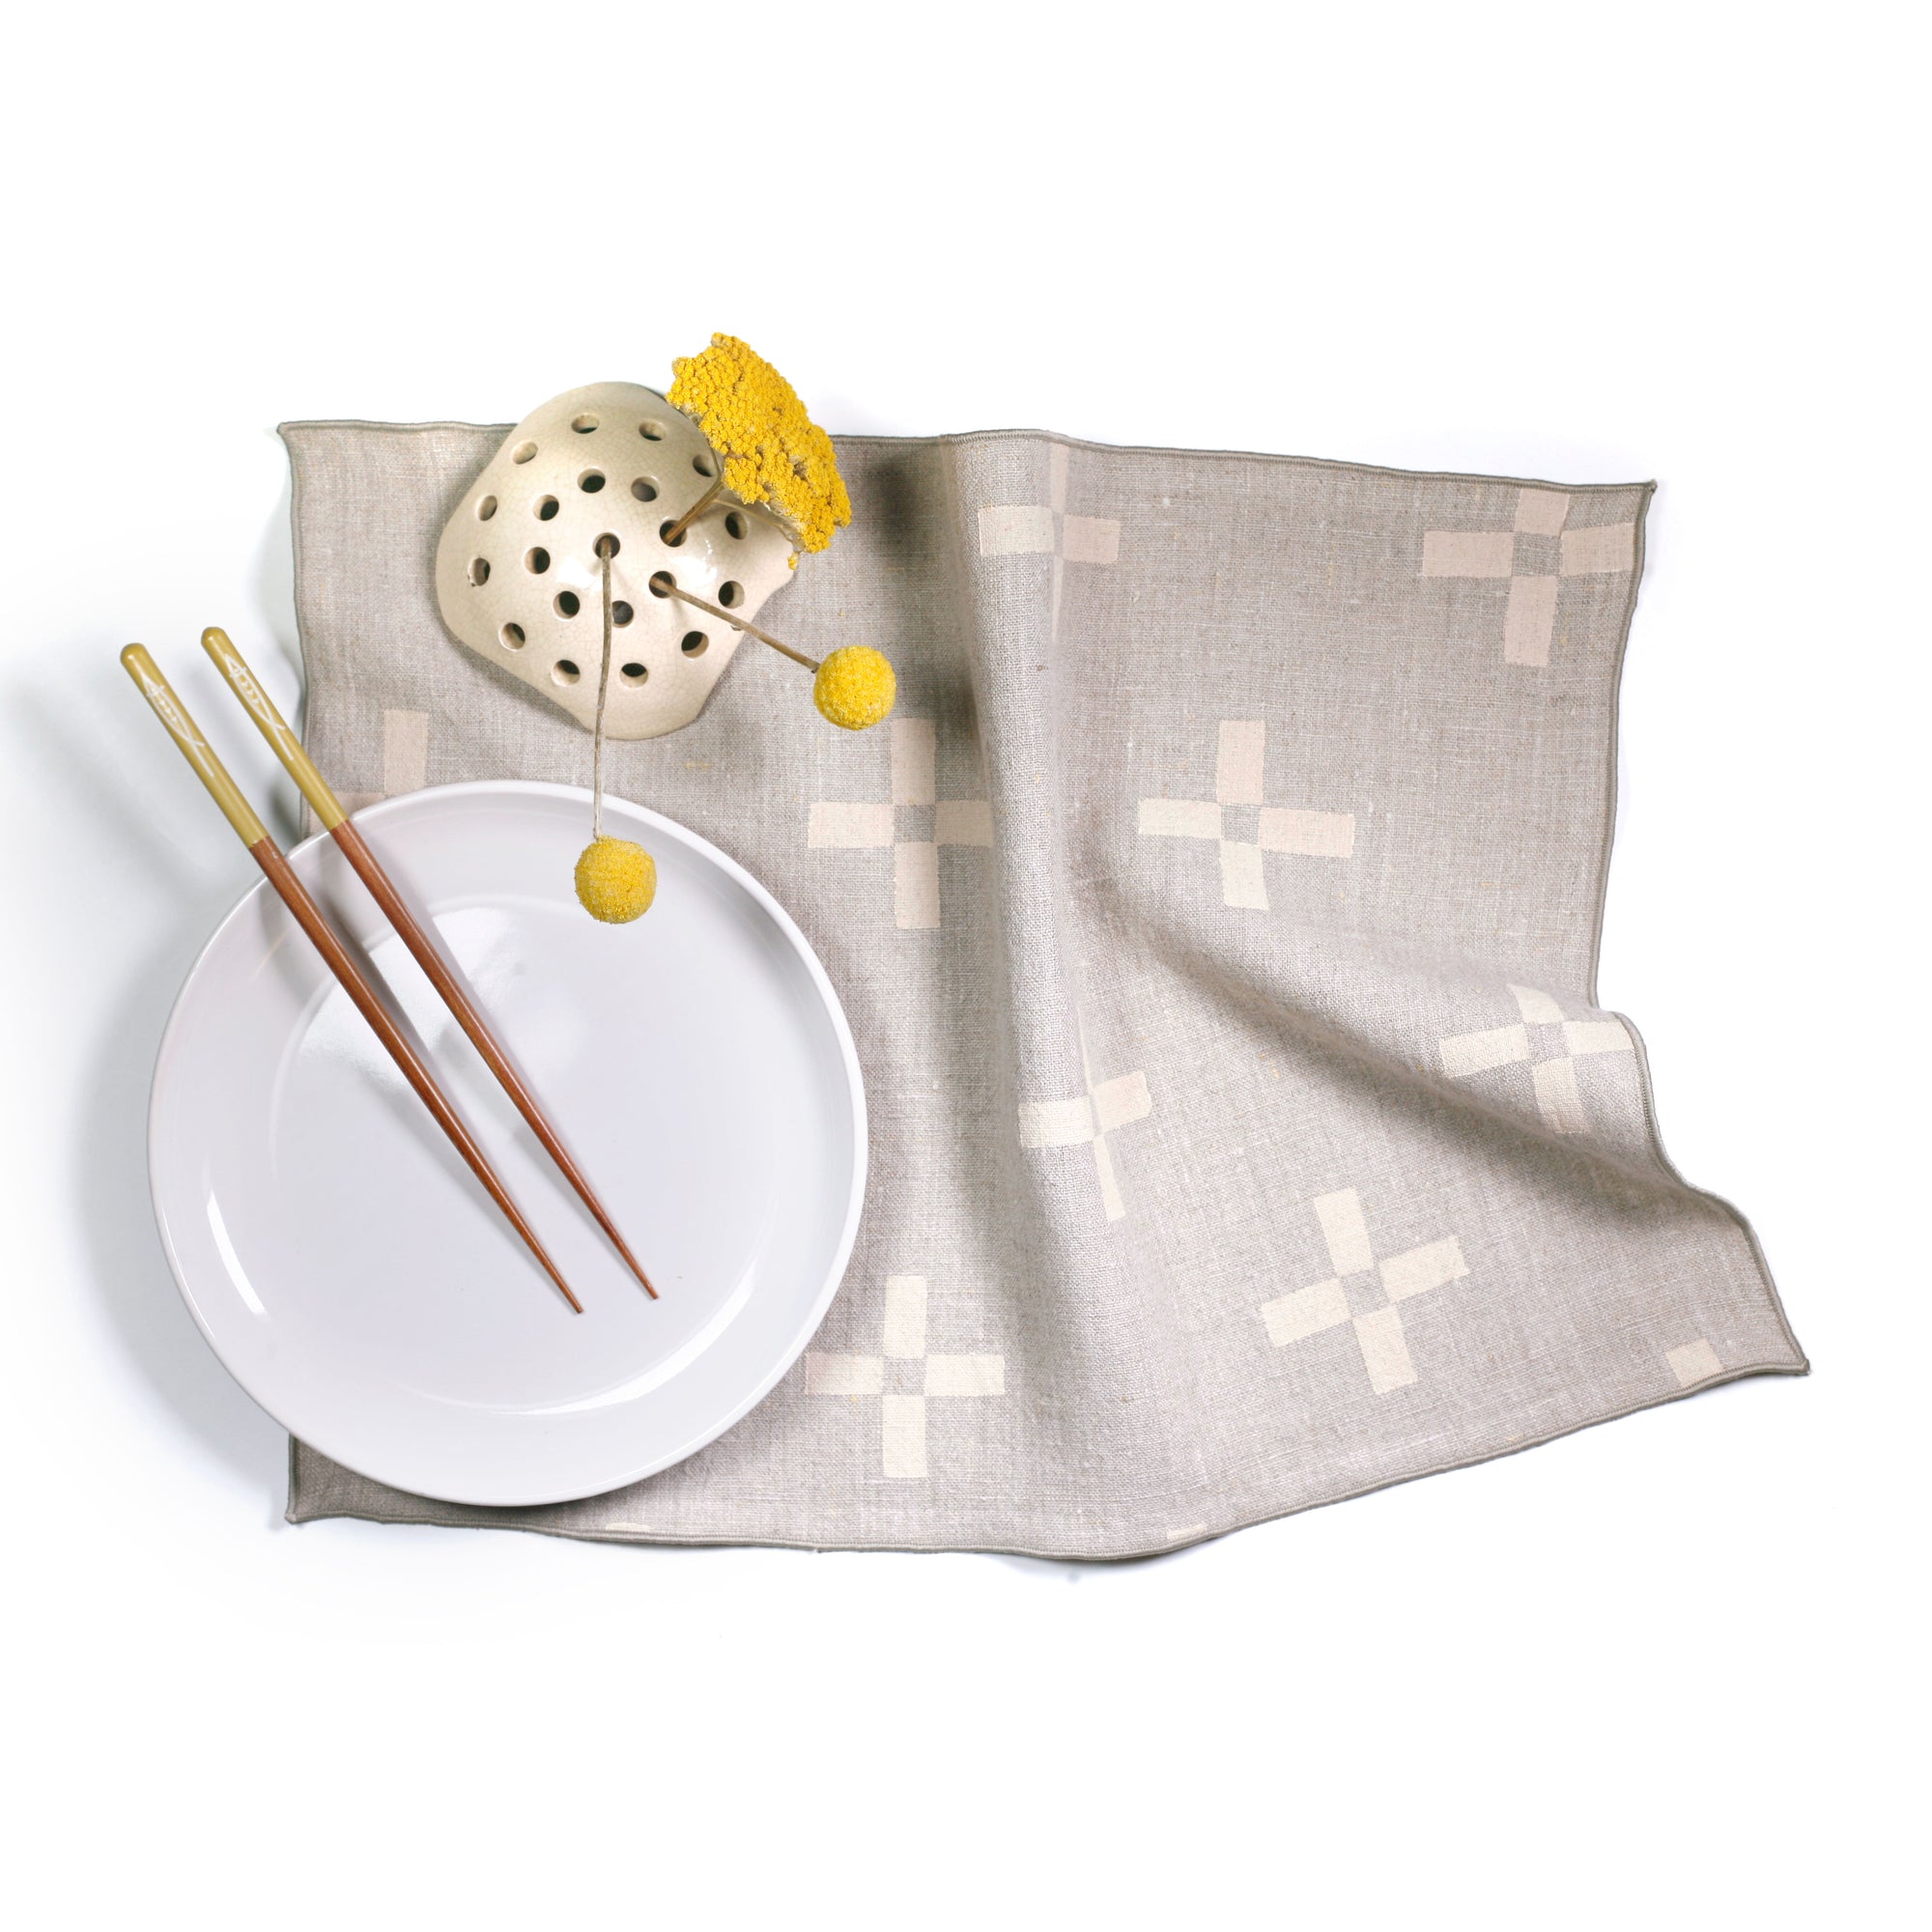 Bundle: 'Plus 2' Hand-Printed Linens, Place-setting for 2